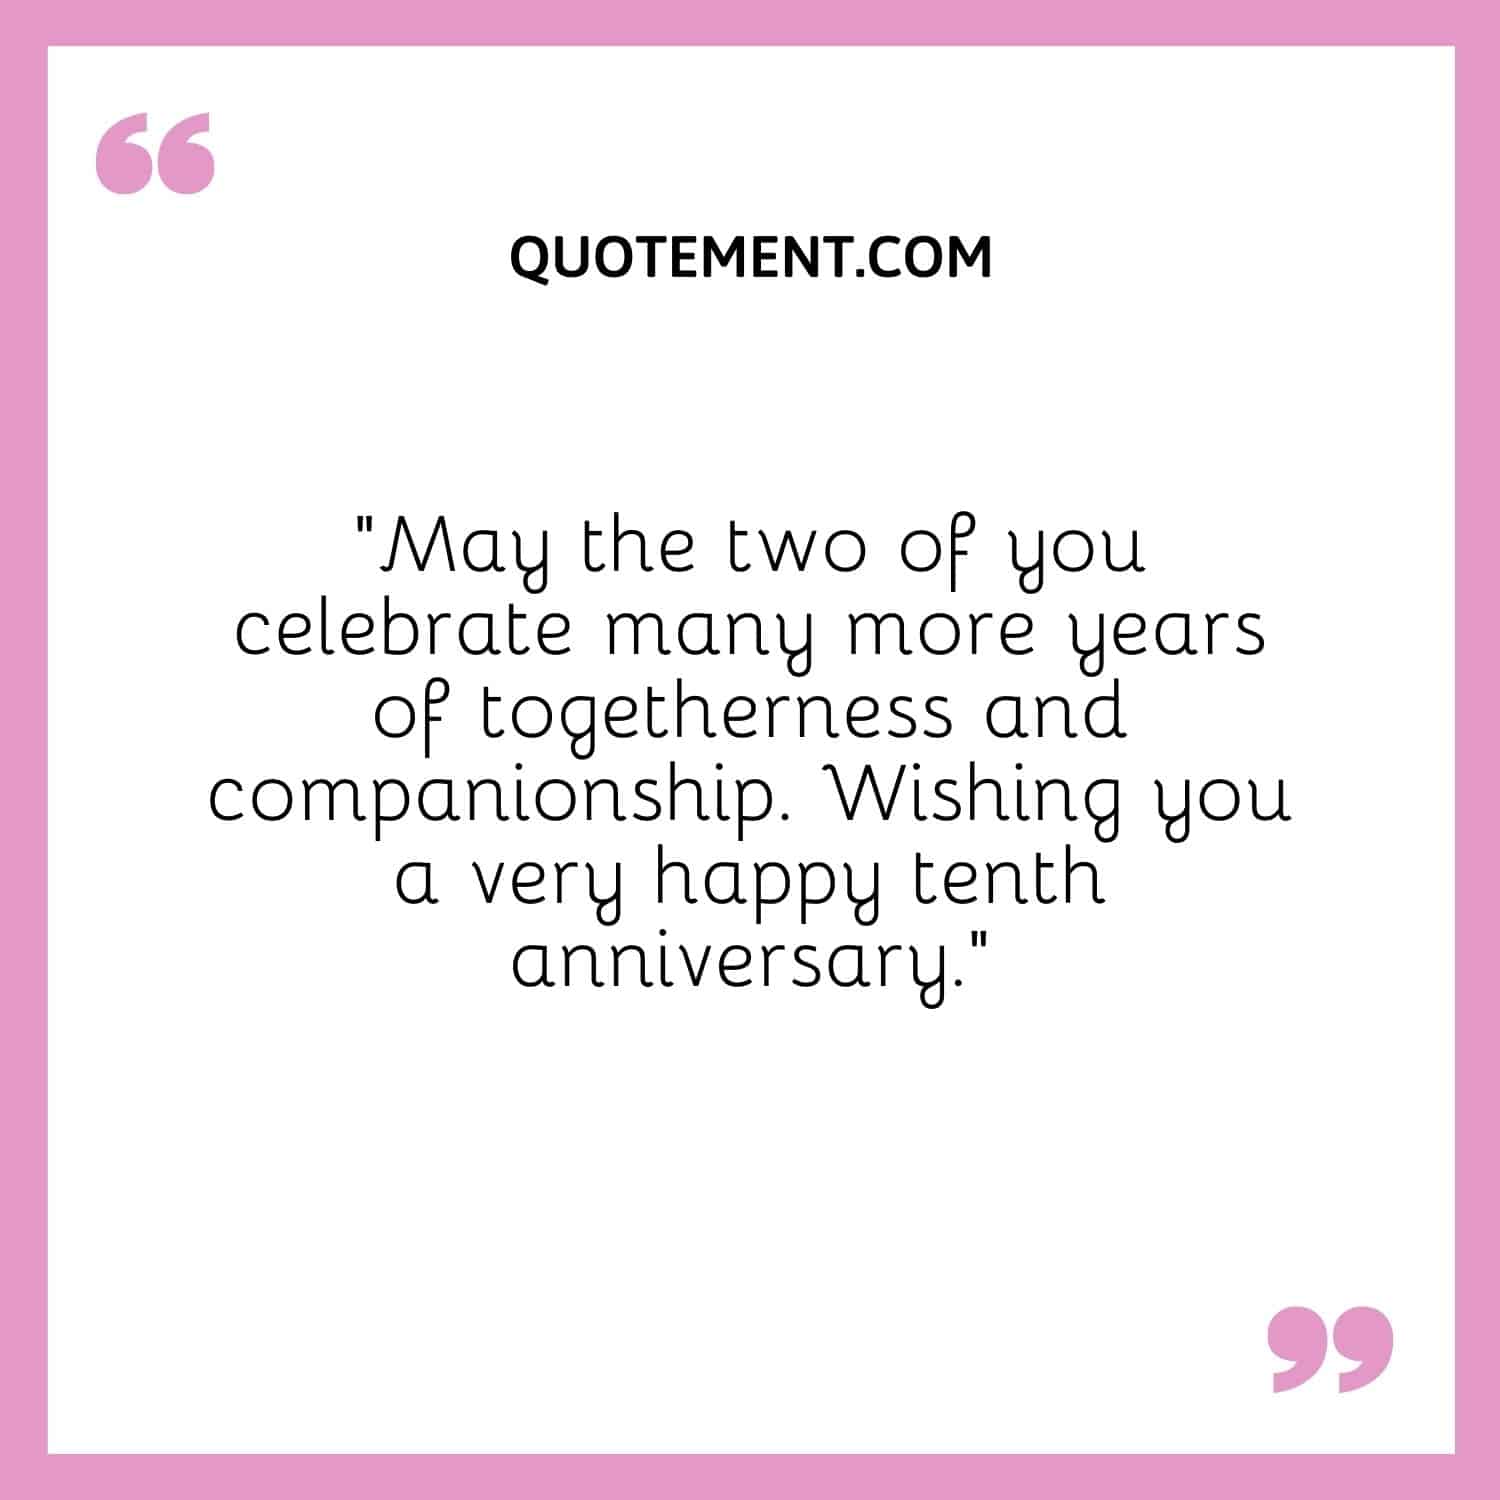 May the two of you celebrate many more years of togetherness and companionship